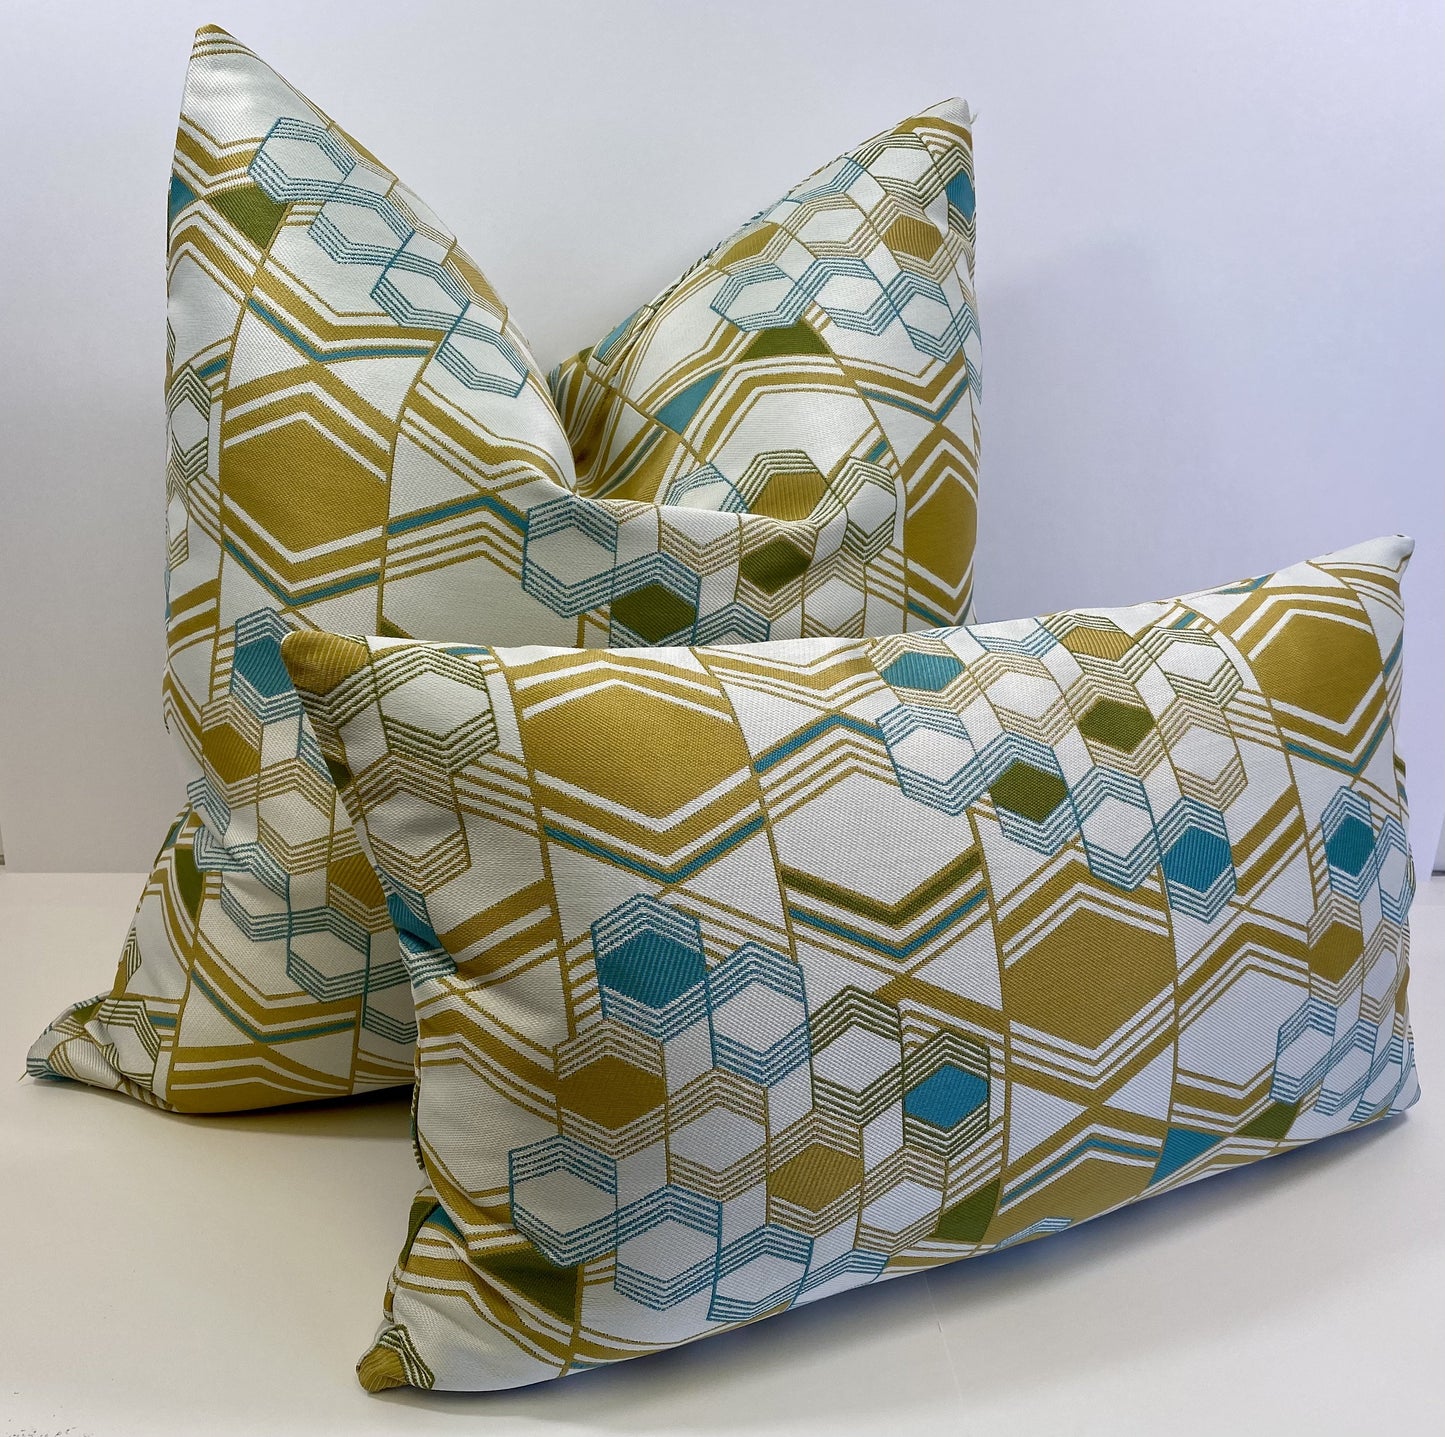 Luxury Lumbar Pillow - 24" x 14" -  Deco - Crystal Topaz; Gold and teal woven chevrons